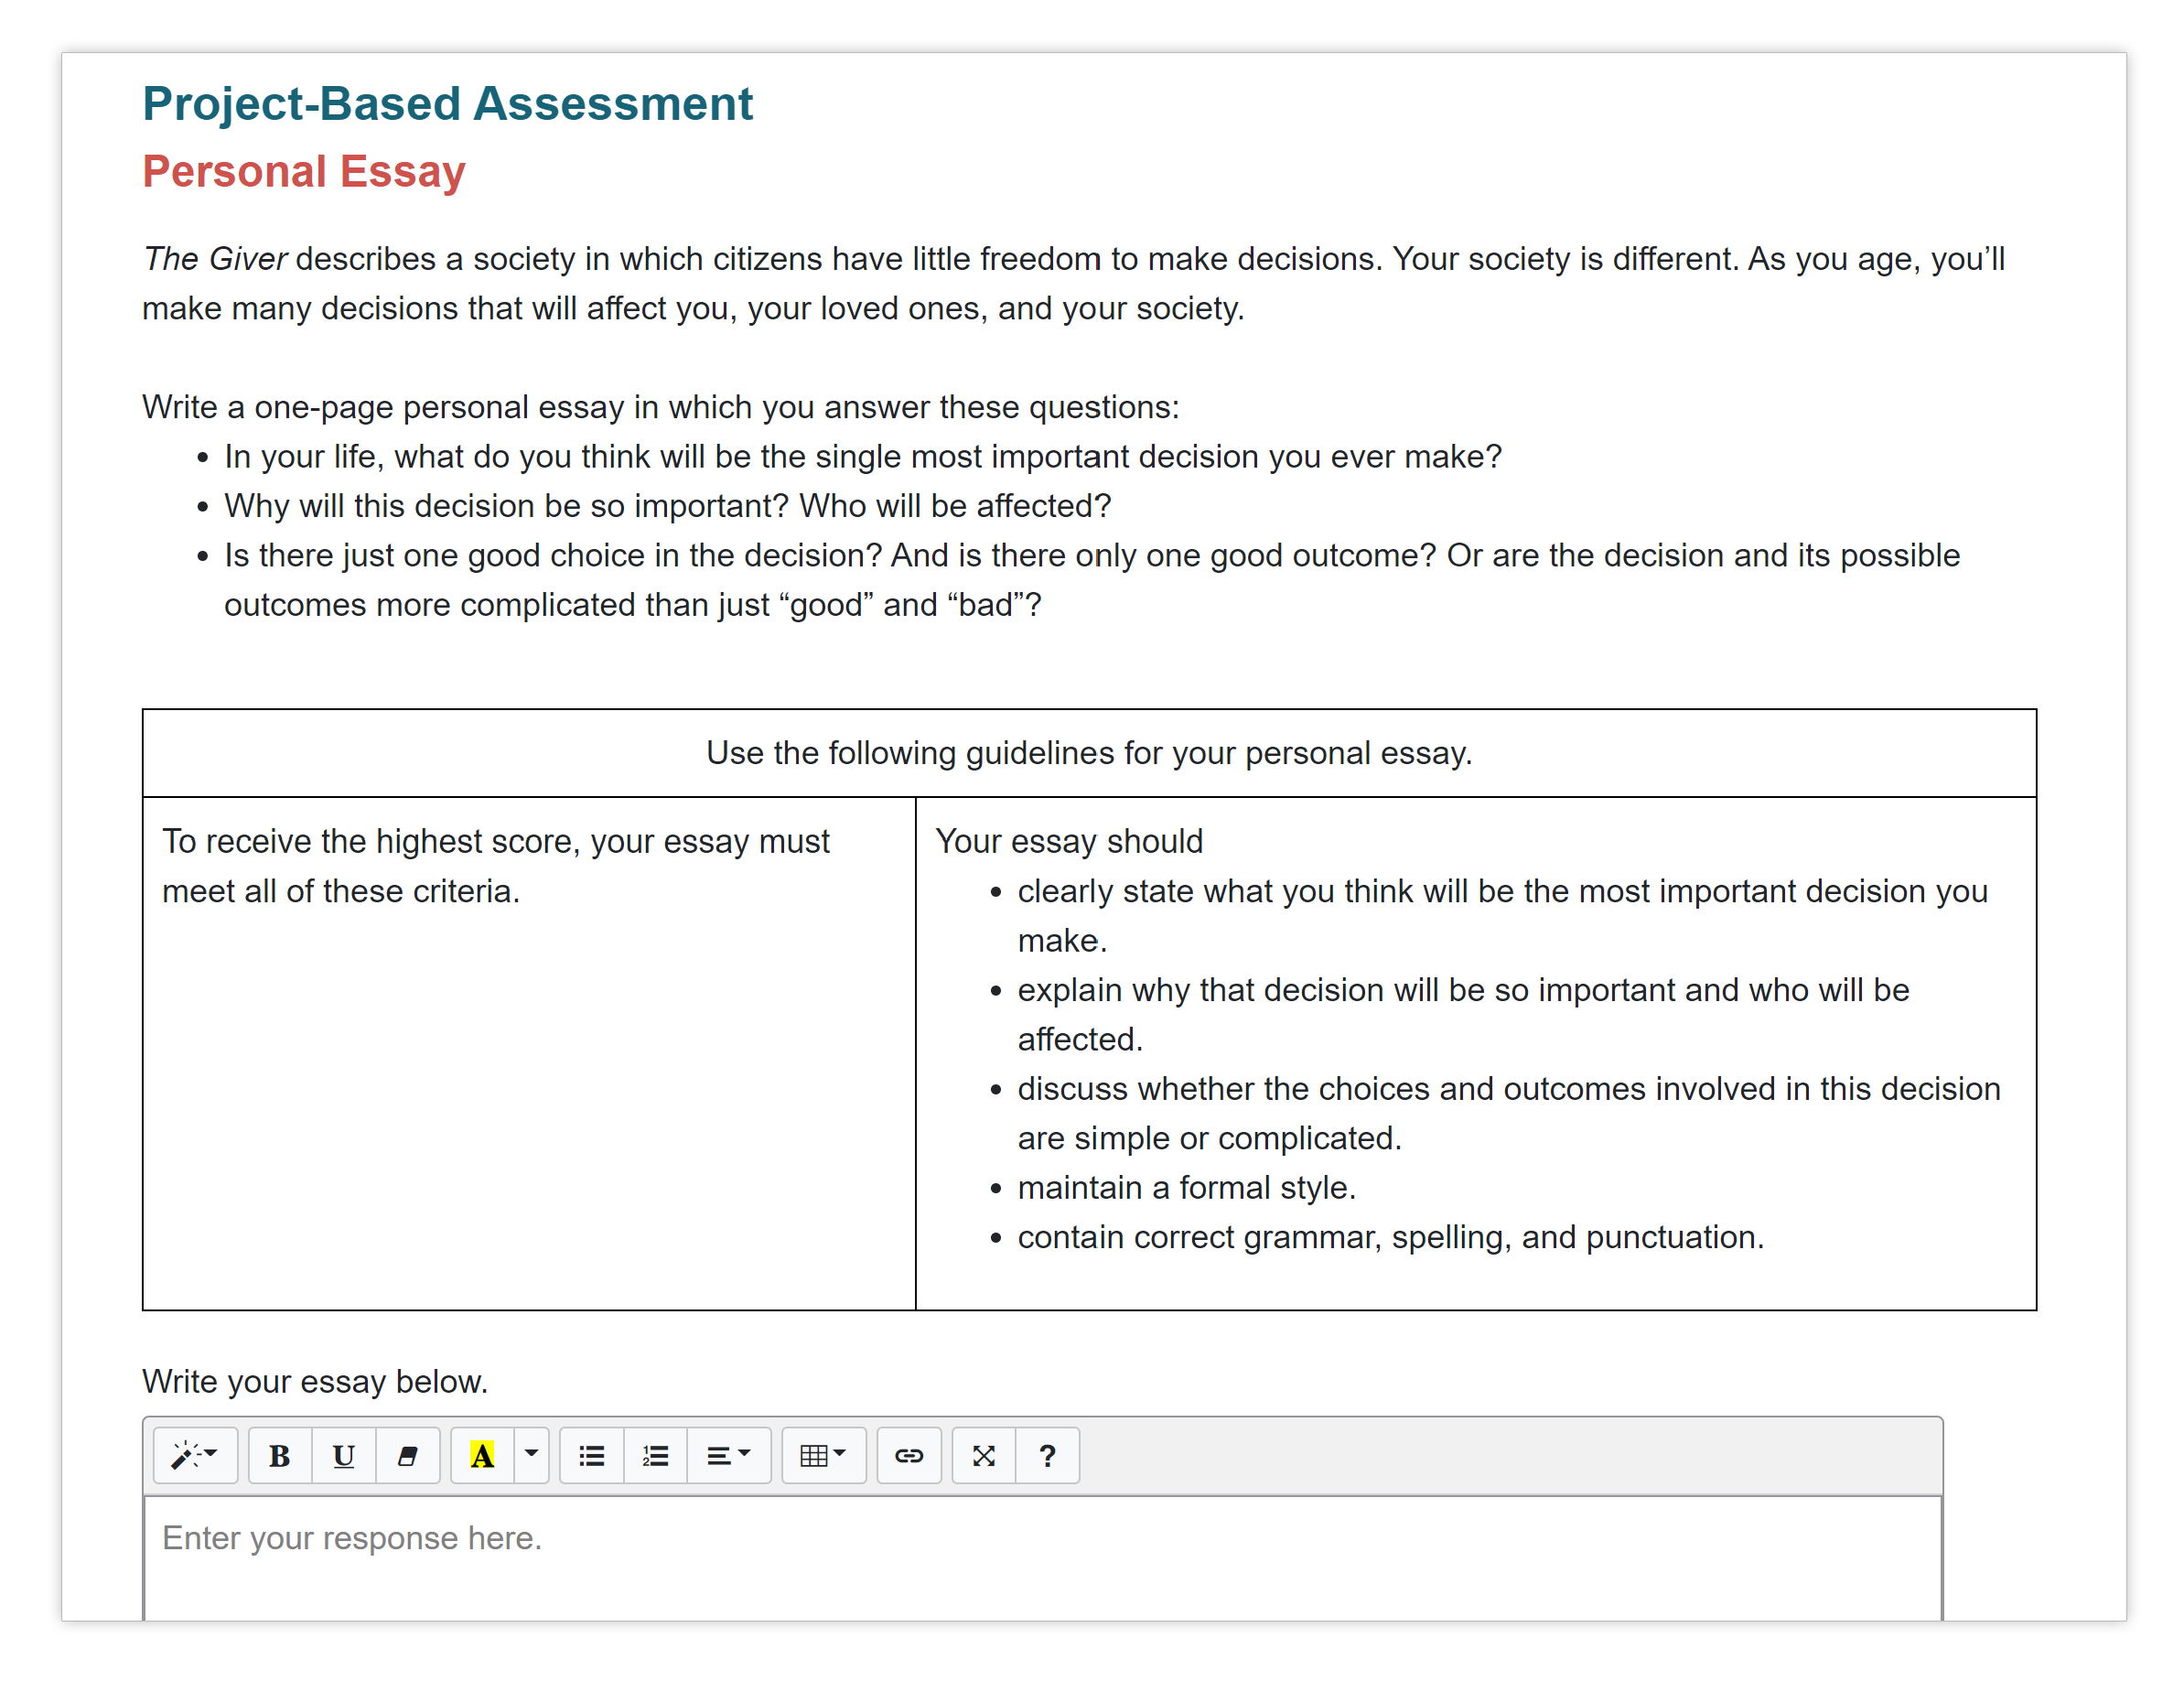 example of project-based assessment - personal essay